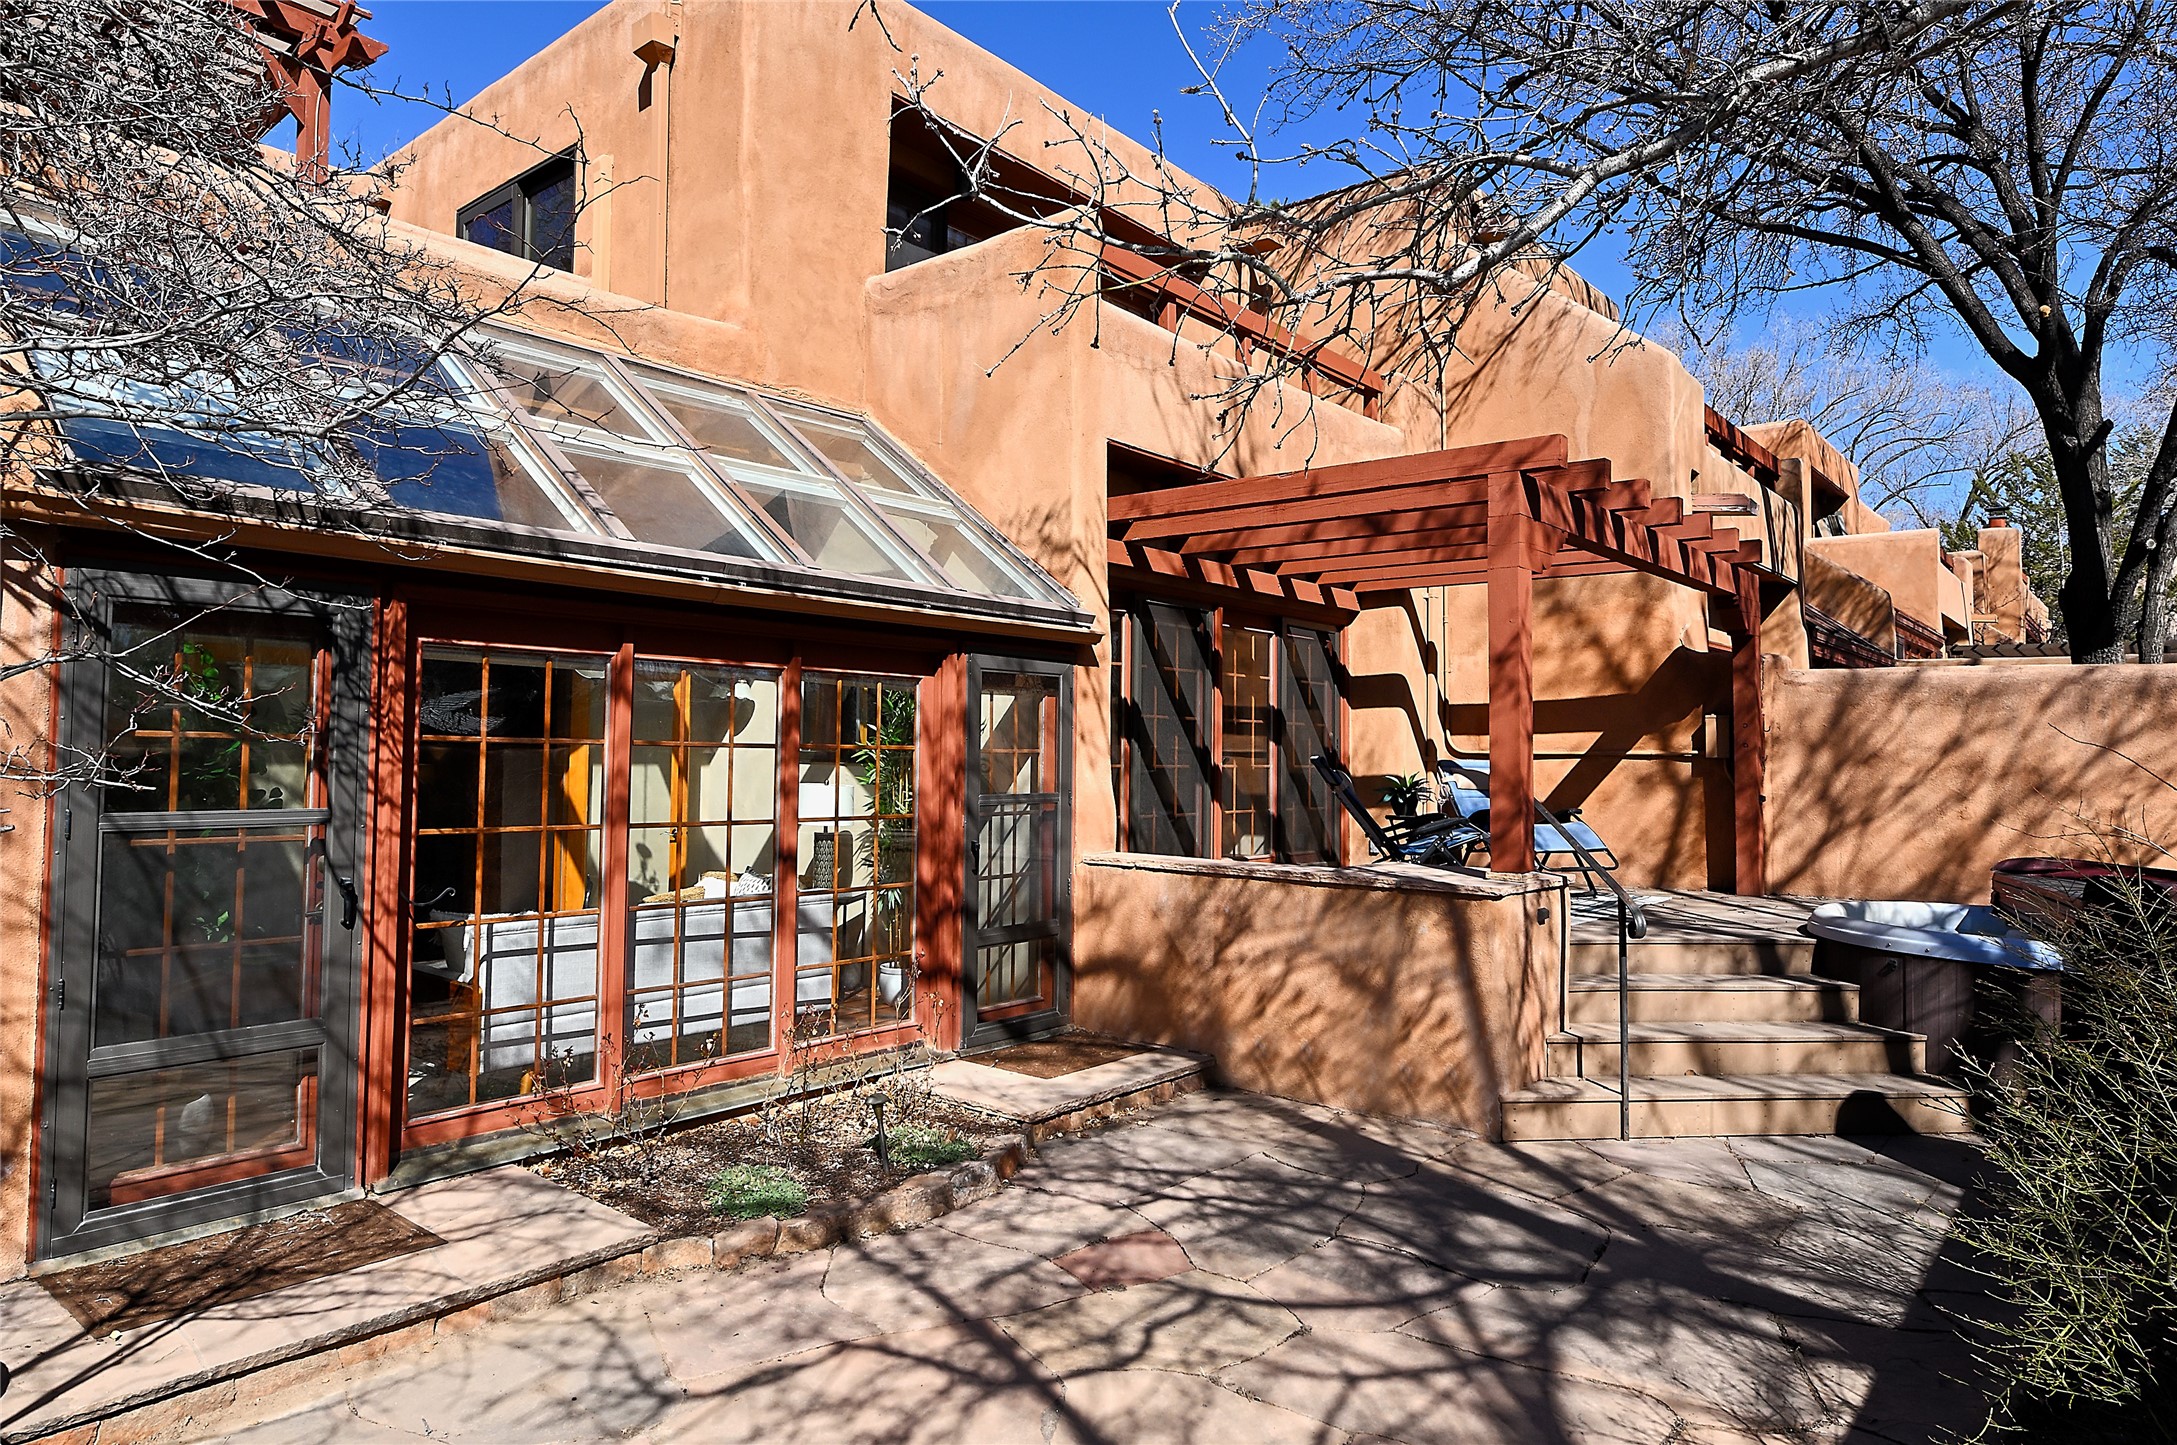 707 Palace 1, Santa Fe, New Mexico 87501, 3 Bedrooms Bedrooms, ,3 BathroomsBathrooms,Residential,For Sale,707 Palace 1,202234500